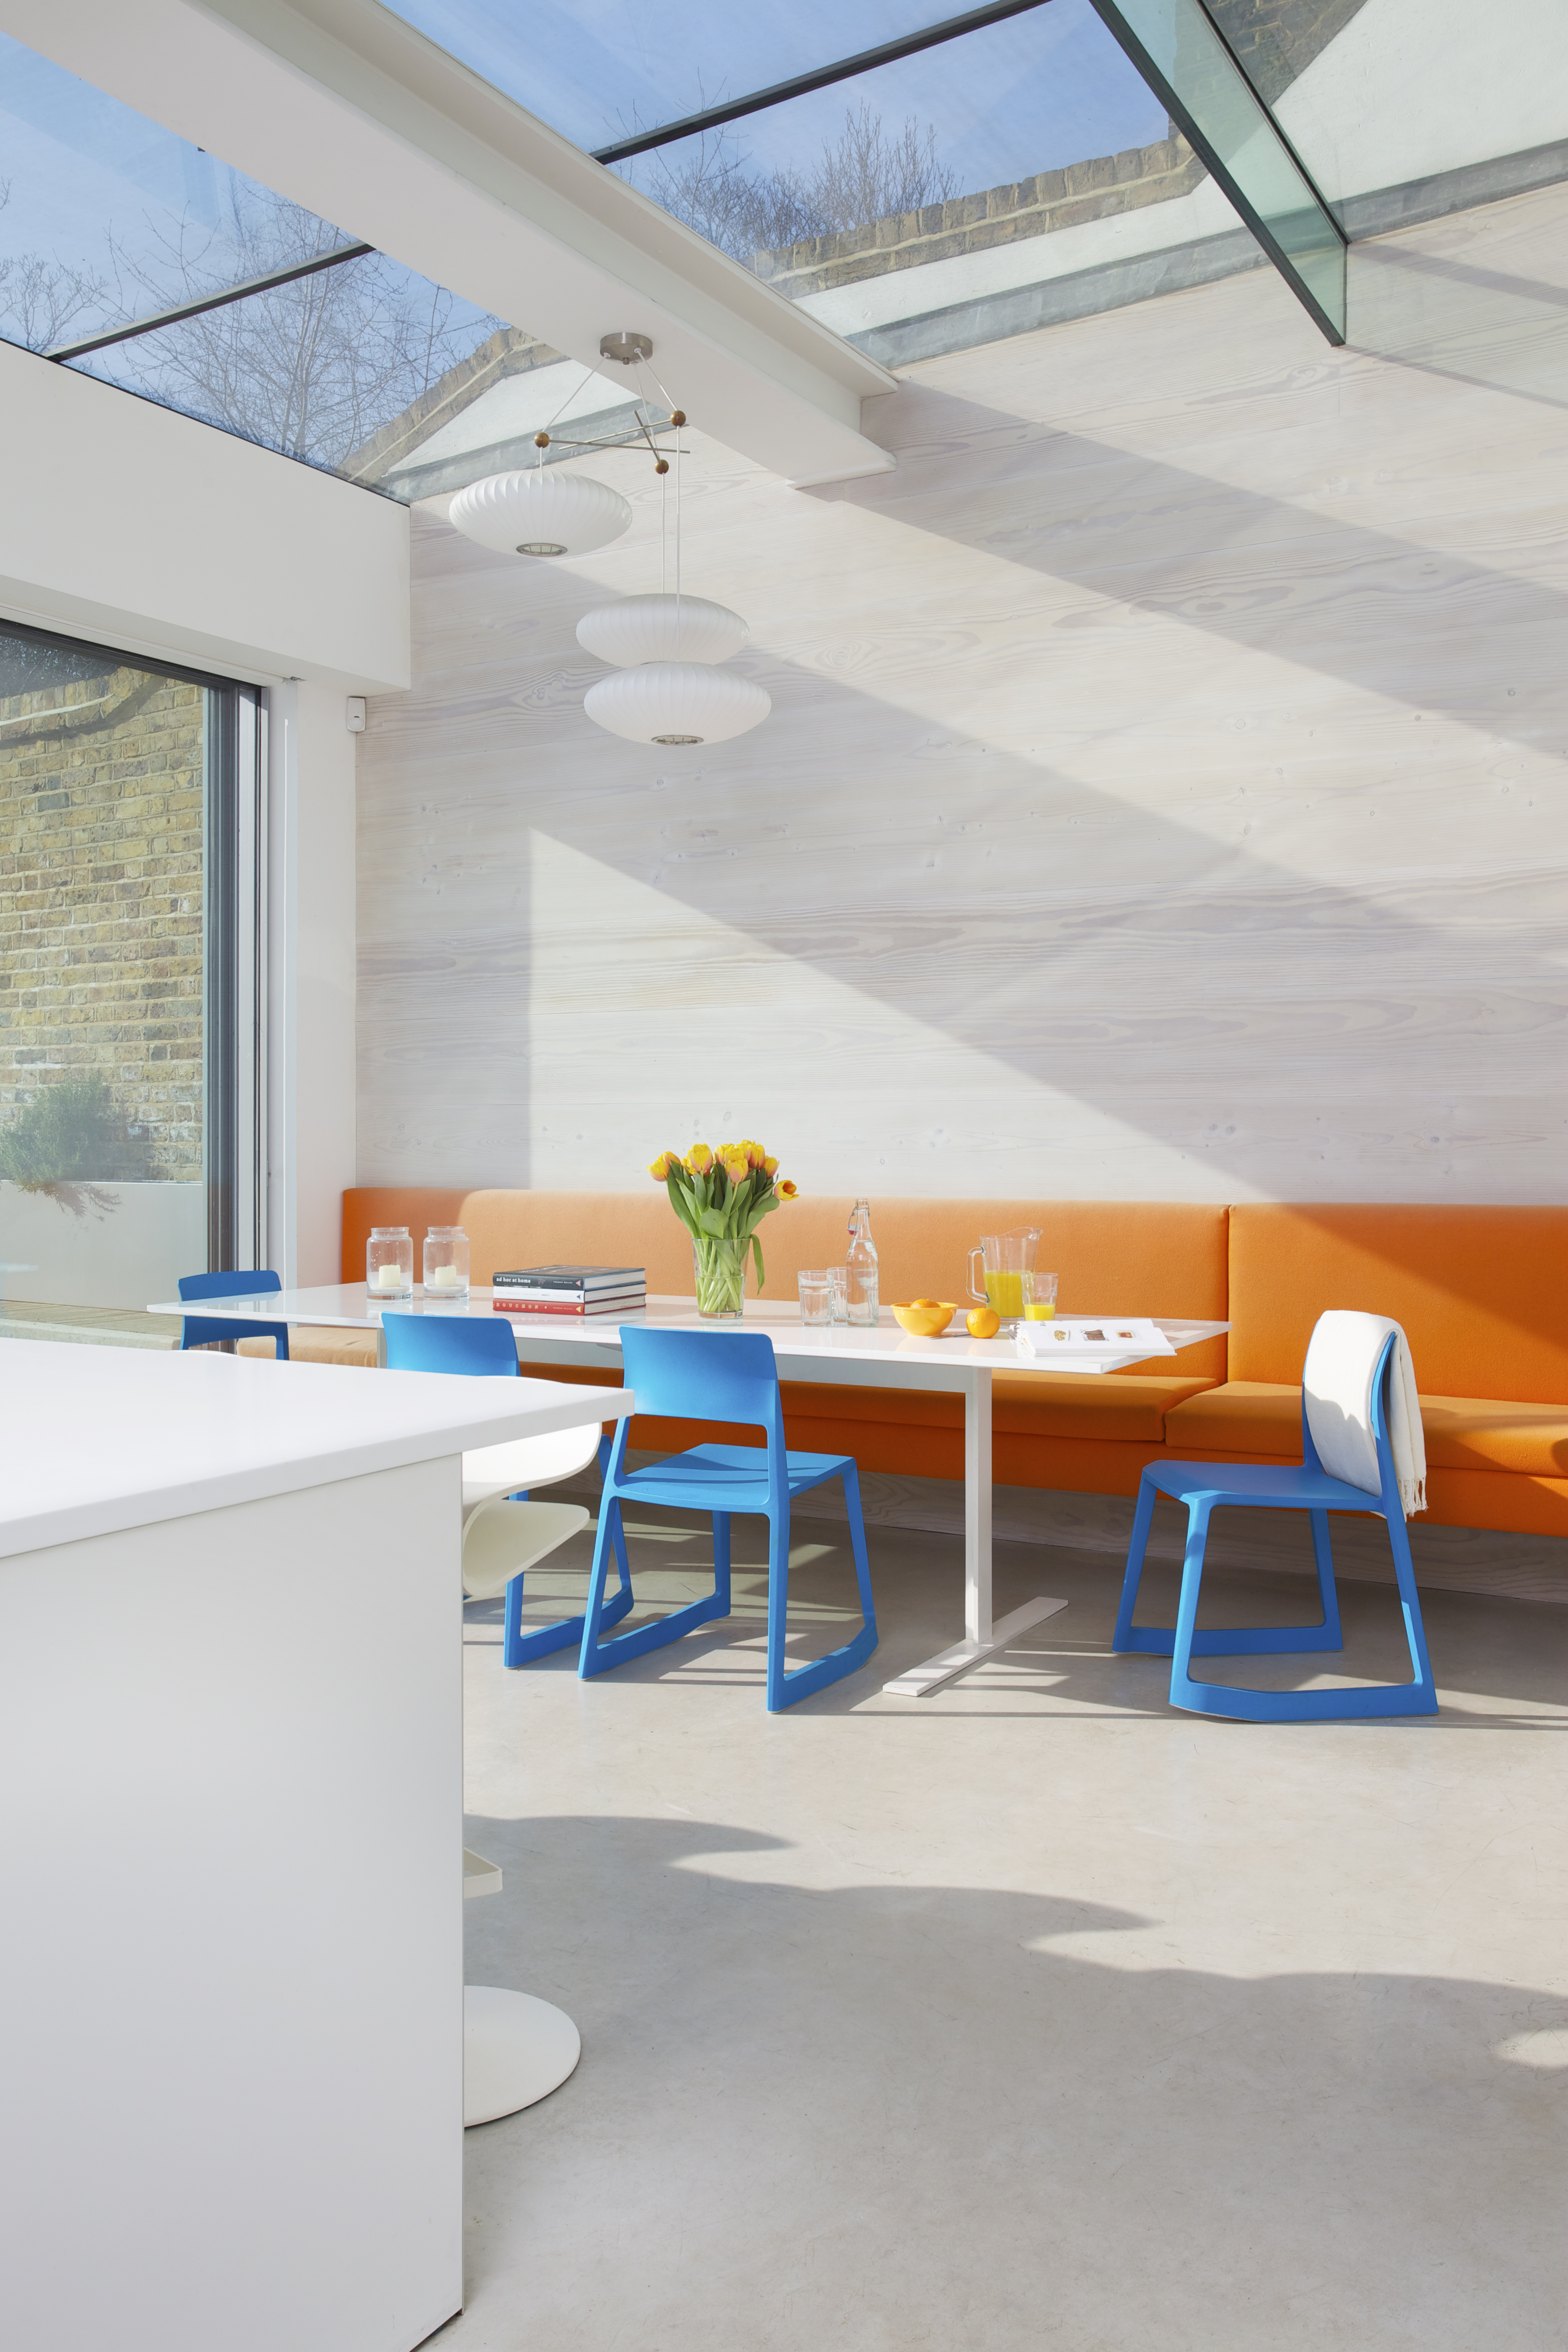 banquette seating ideas - booth seating in kitchen extension